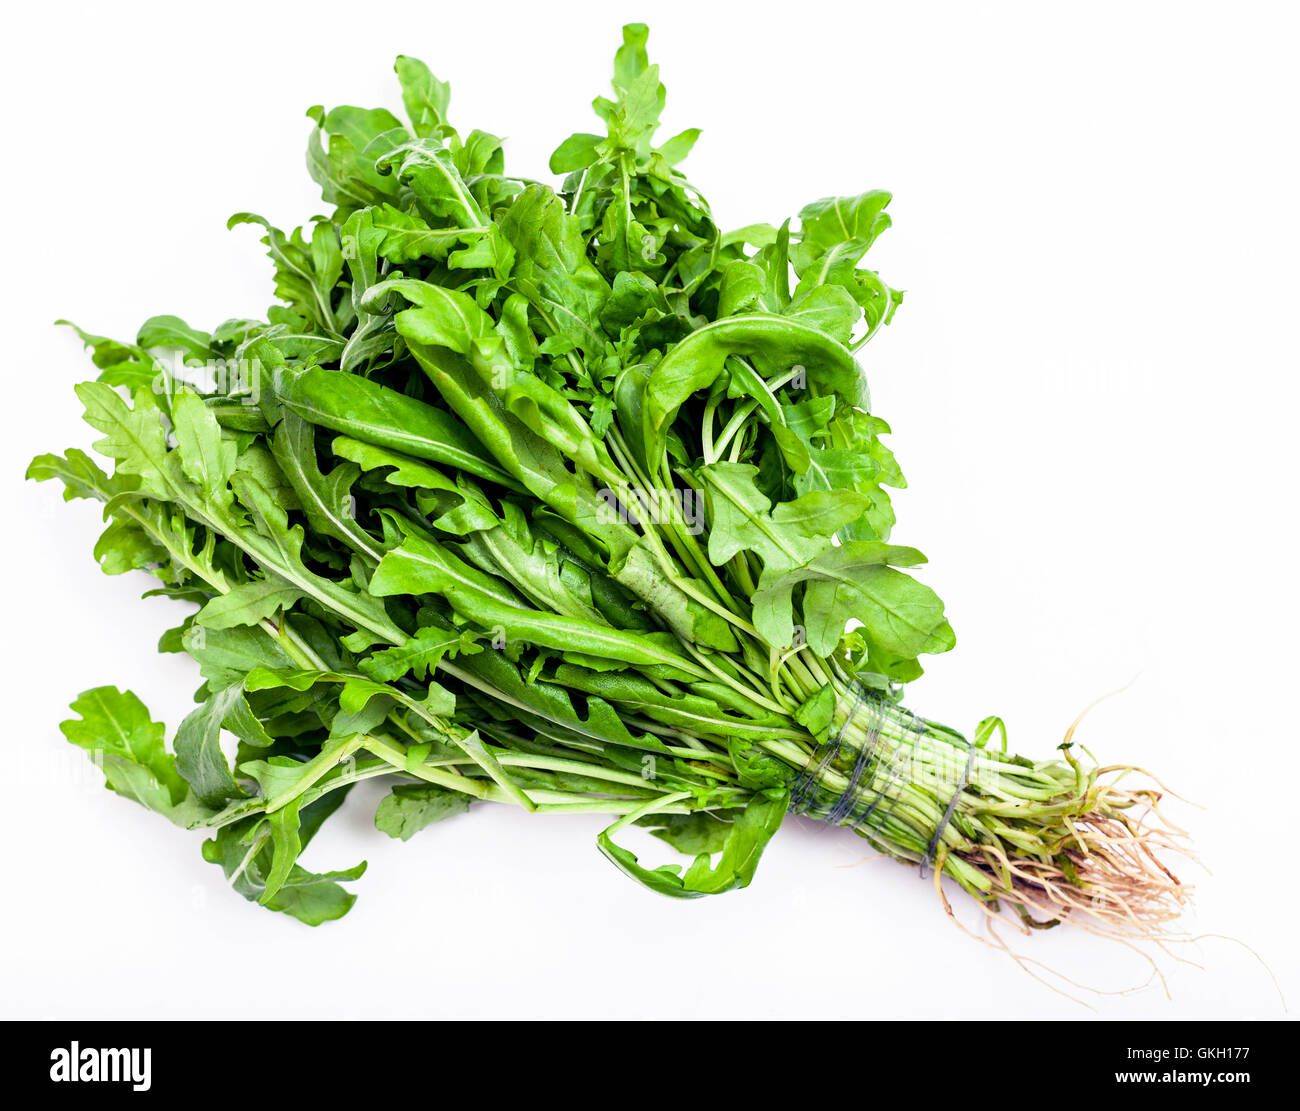 bunch of fresh cut green salad rocket herb on white background Stock Photo